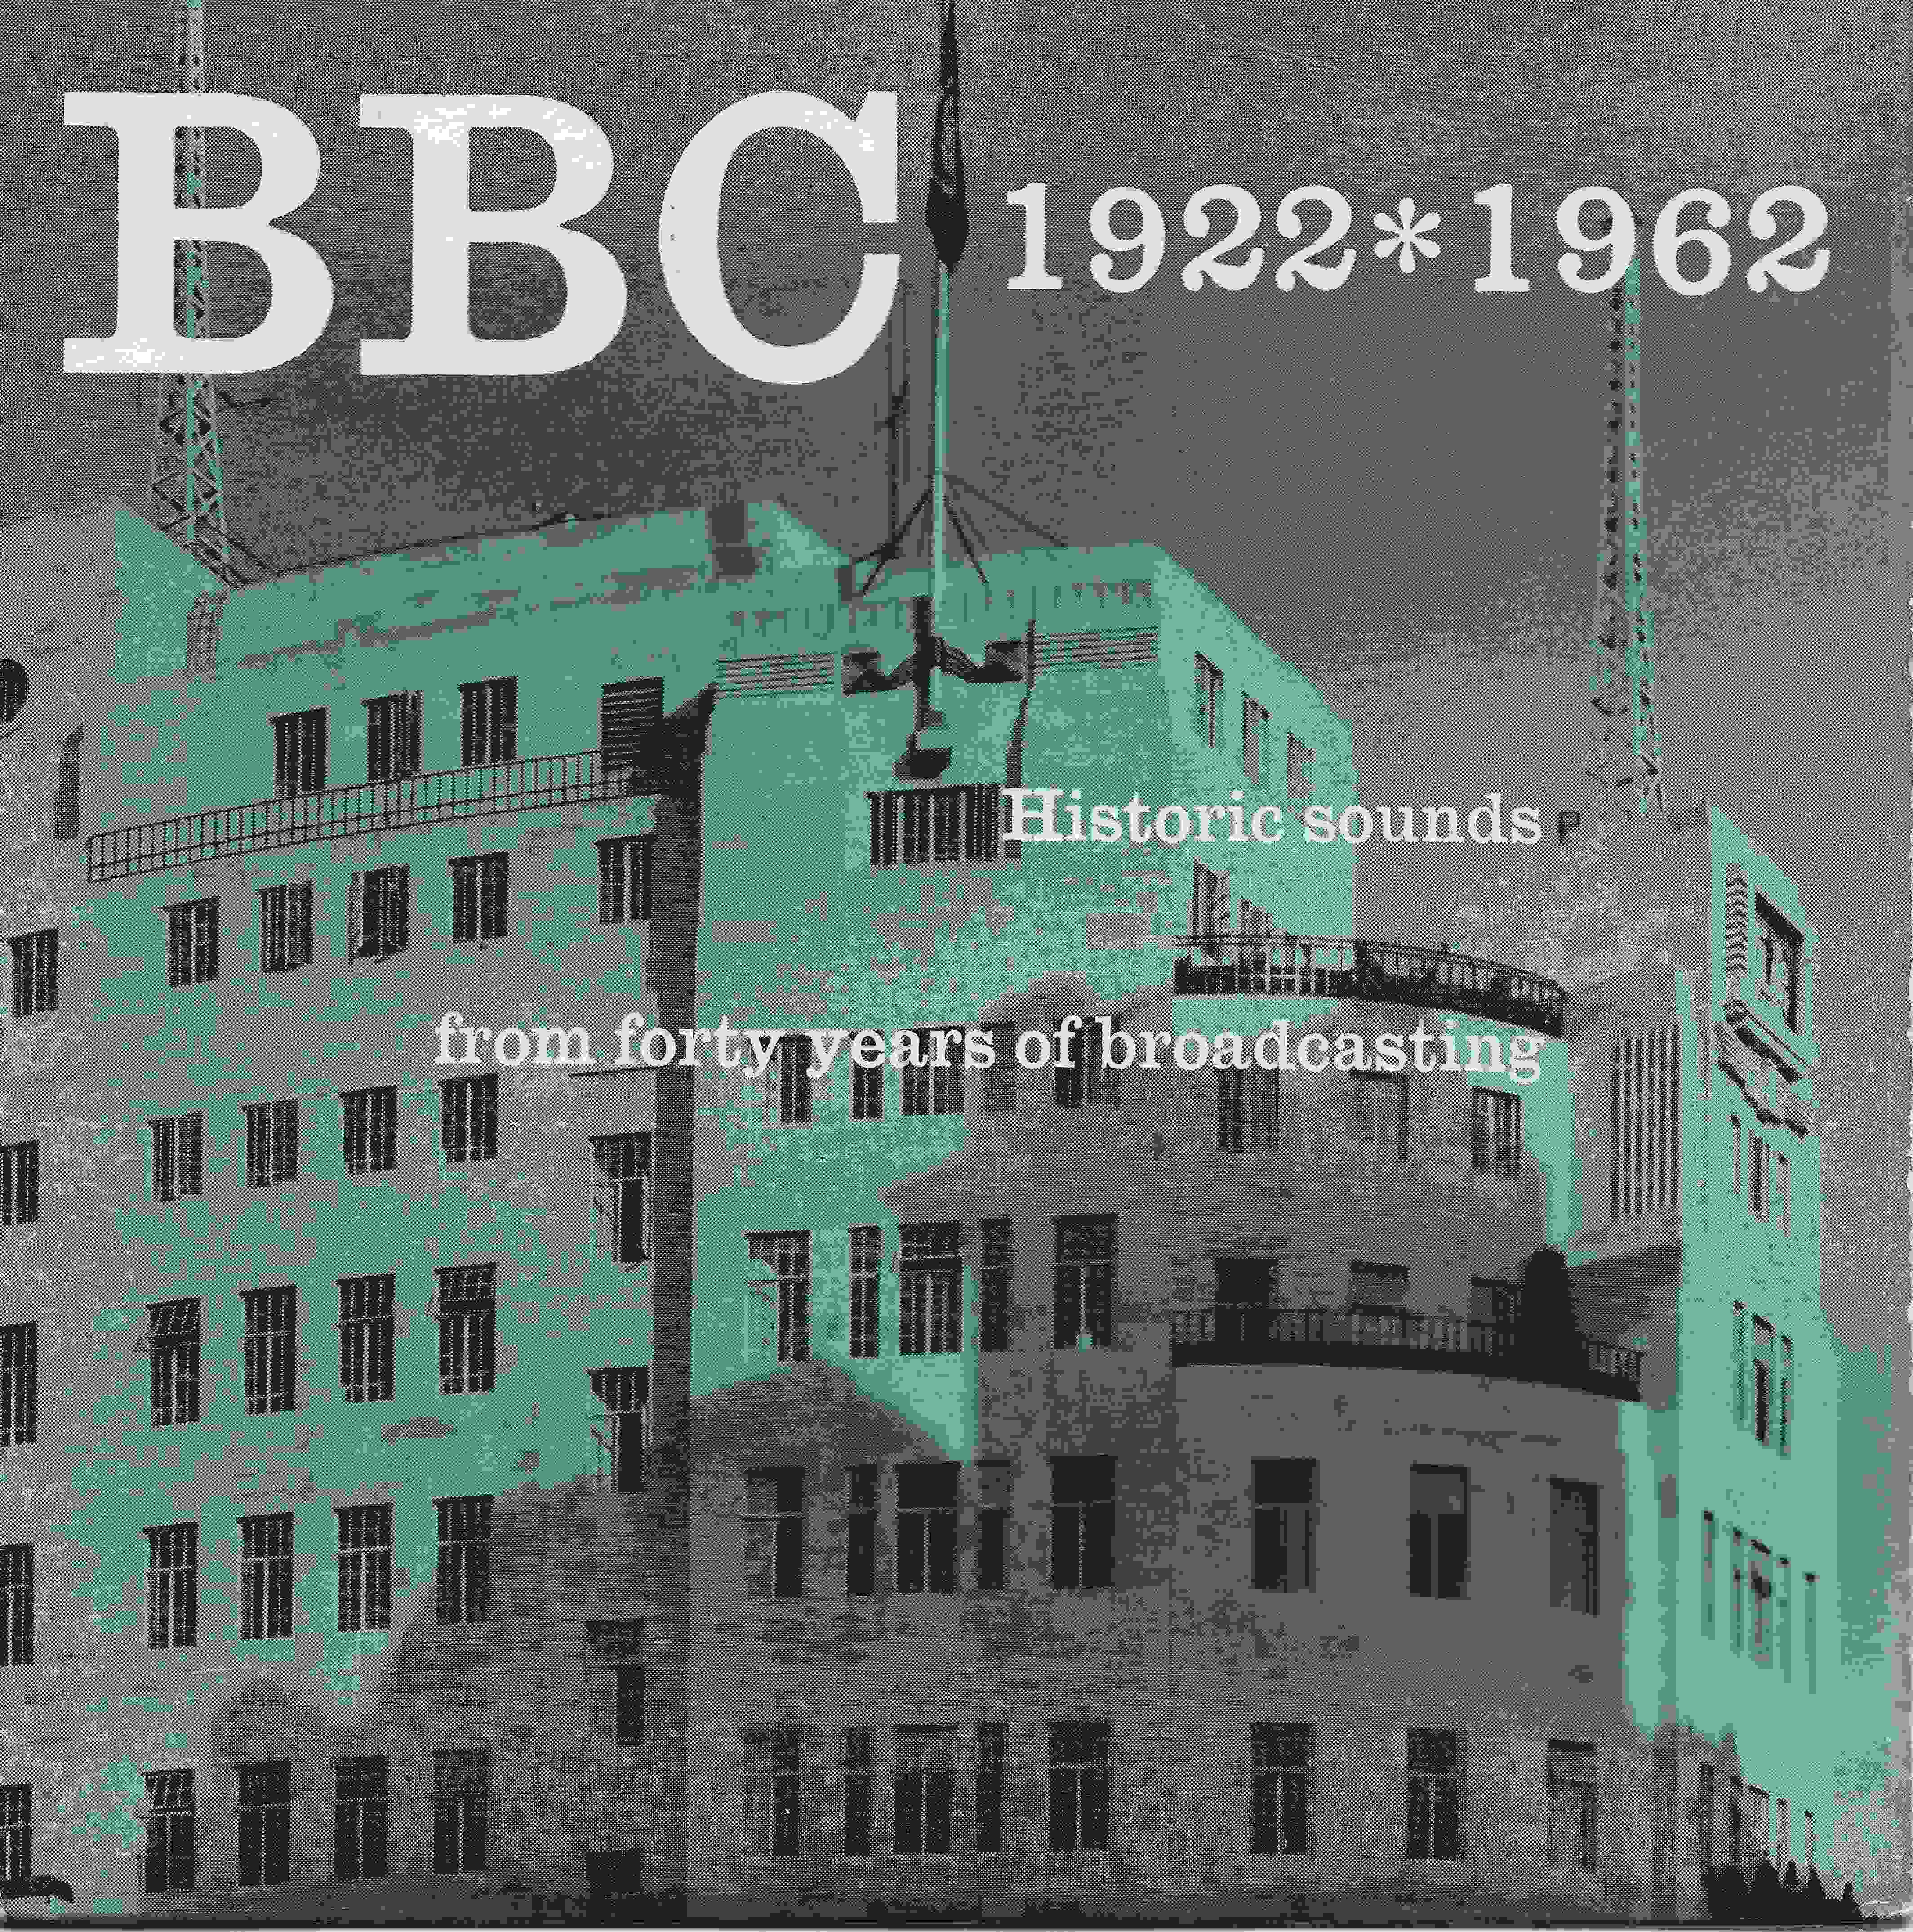 Picture of BBC 1922*1962 - Historic sounds from forty years of broadcasting by artist Various from the BBC singles - Records and Tapes library